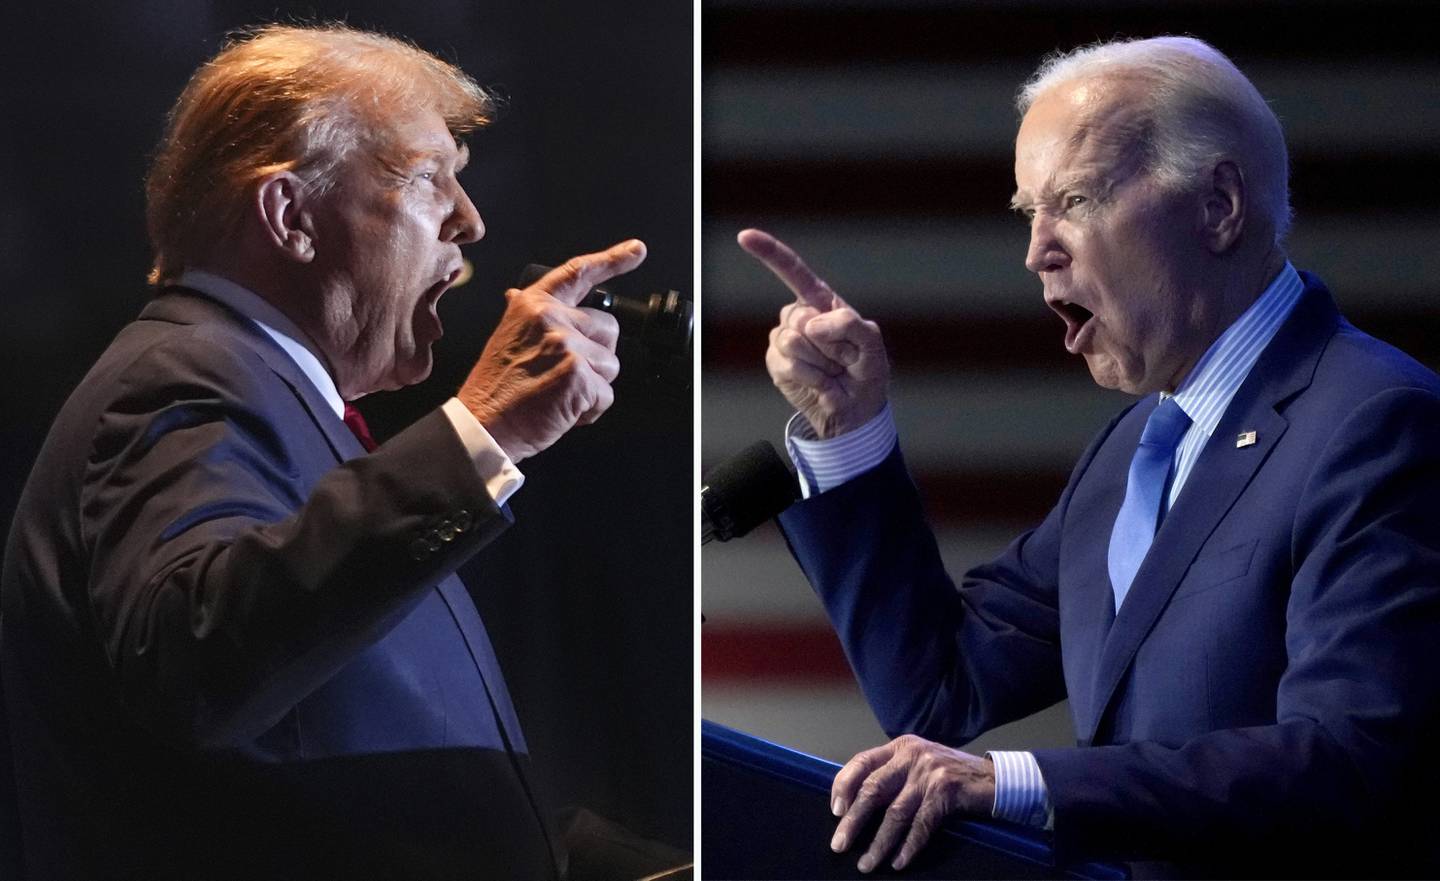 This combination of photos taken in Columbia, S.C. shows former President Donald Trump, left, on Feb. 24, 2024, and President Joe Biden on Jan. 27, 2024. Biden and Trump each won the White House by razor-thin margins in key states. Now, with a rematch of their bitter 2020 campaign all but officially set after Super Tuesday, the two campaigns are unveiling their strategies for an unprecedented matchup between a president and his immediate predecessor. (AP Photo)